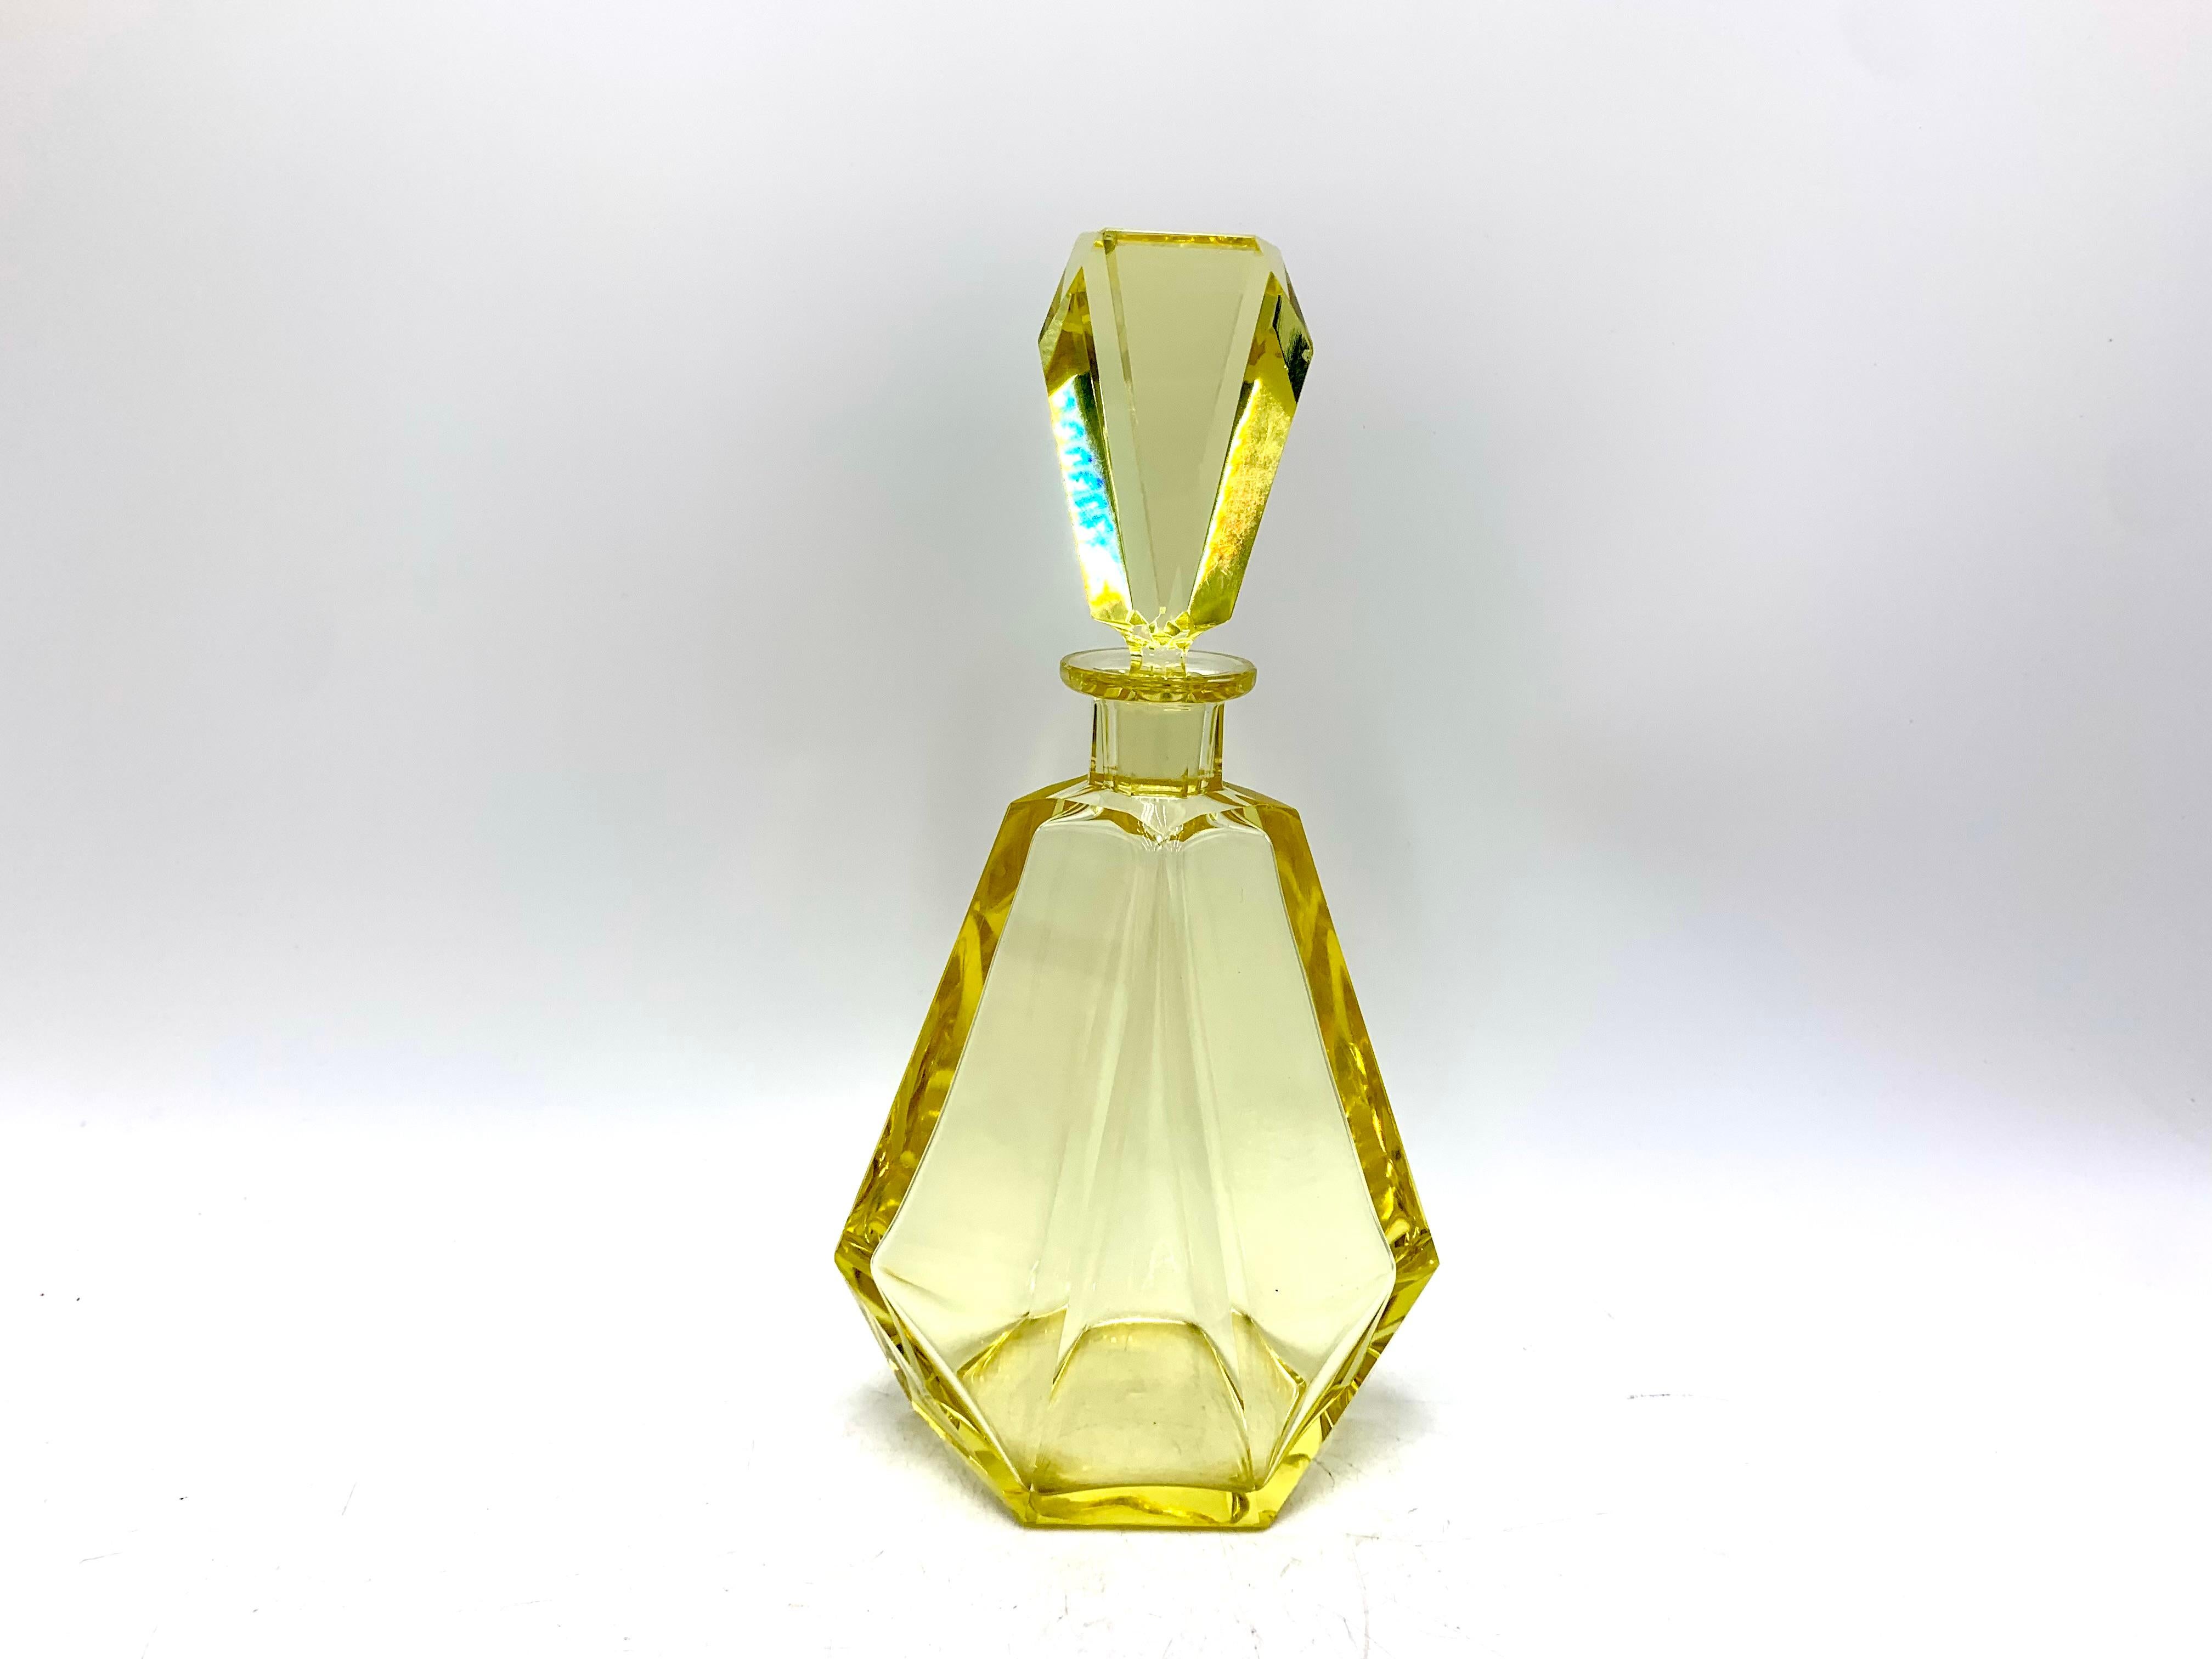 A beautiful Art Deco style crystal yellow decanter made in the Czech Republic in the 1930s. Very good condition, very slight traces of time.

Measures: height 25cm
width 13cm
depth 9cm.